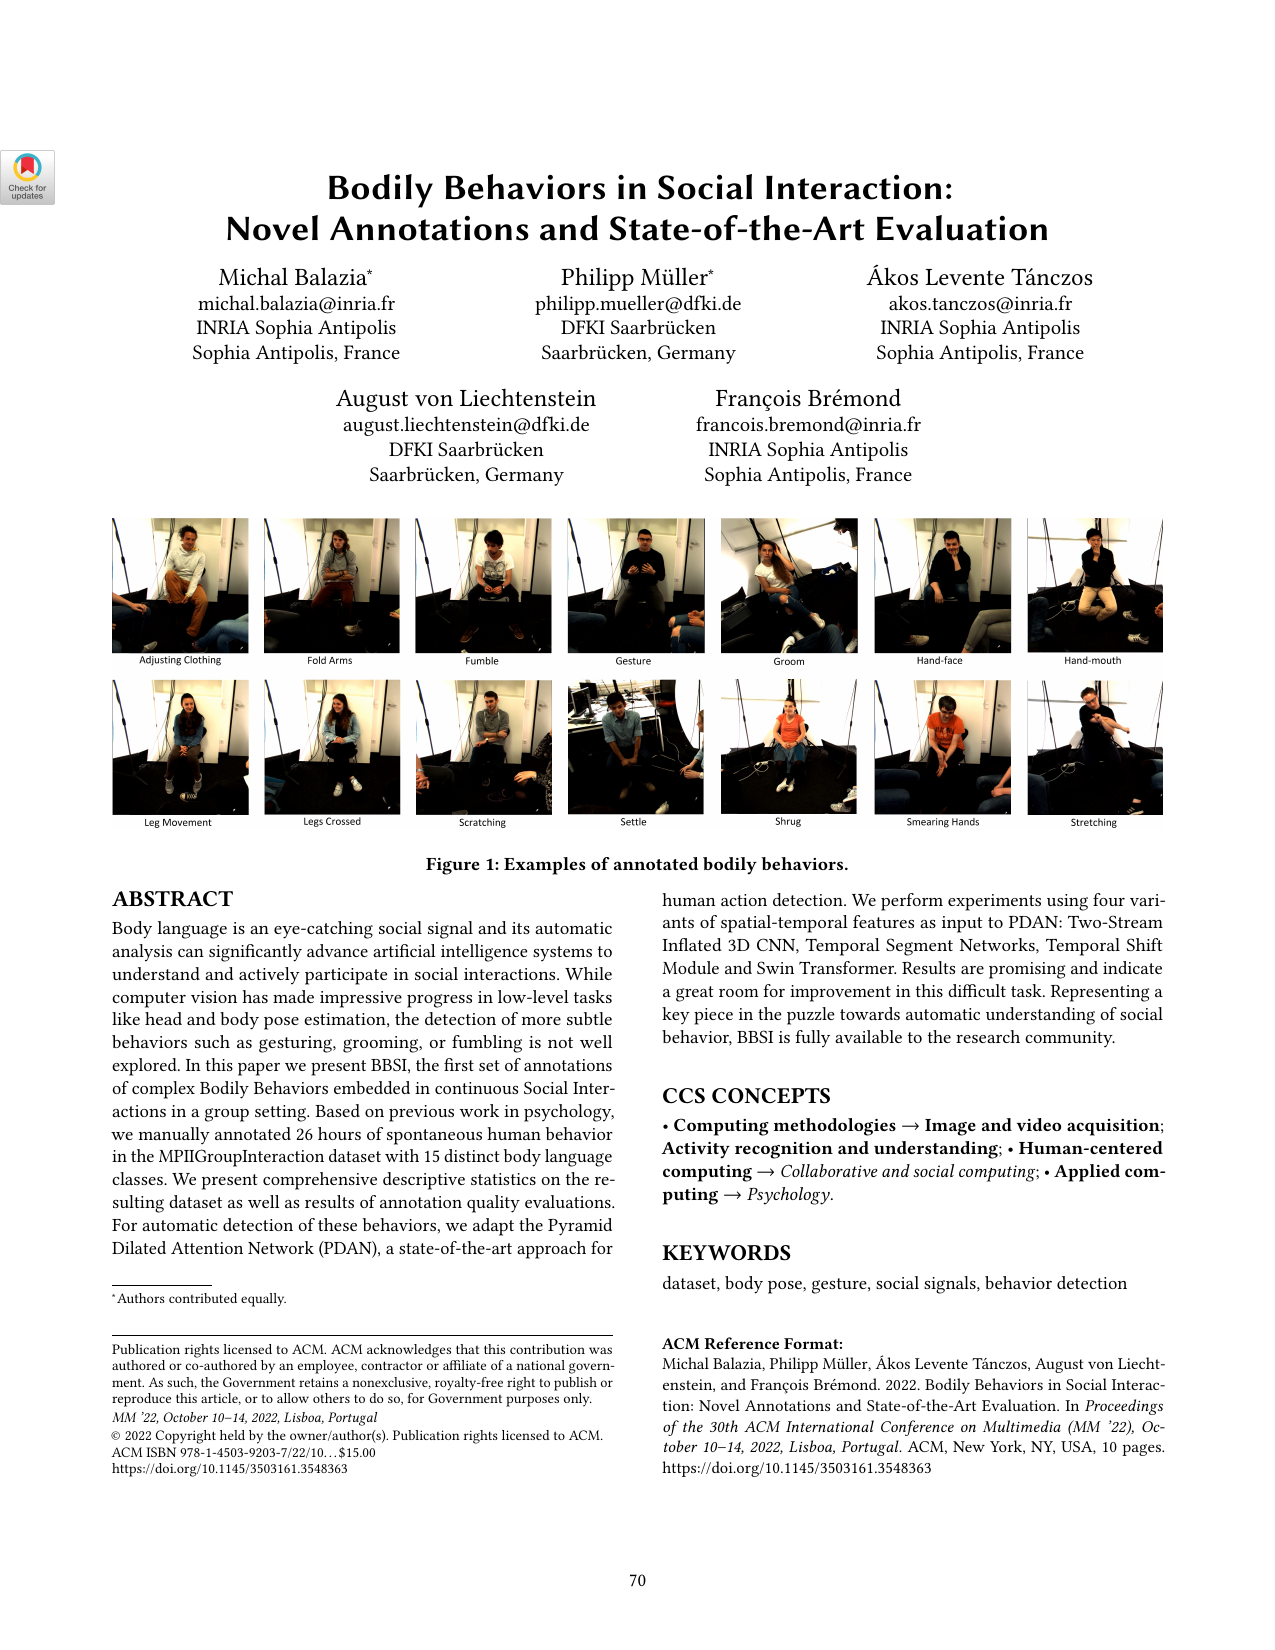 Bodily Behaviors in Social Interaction: Novel Annotations and State-of-the-Art Evaluation